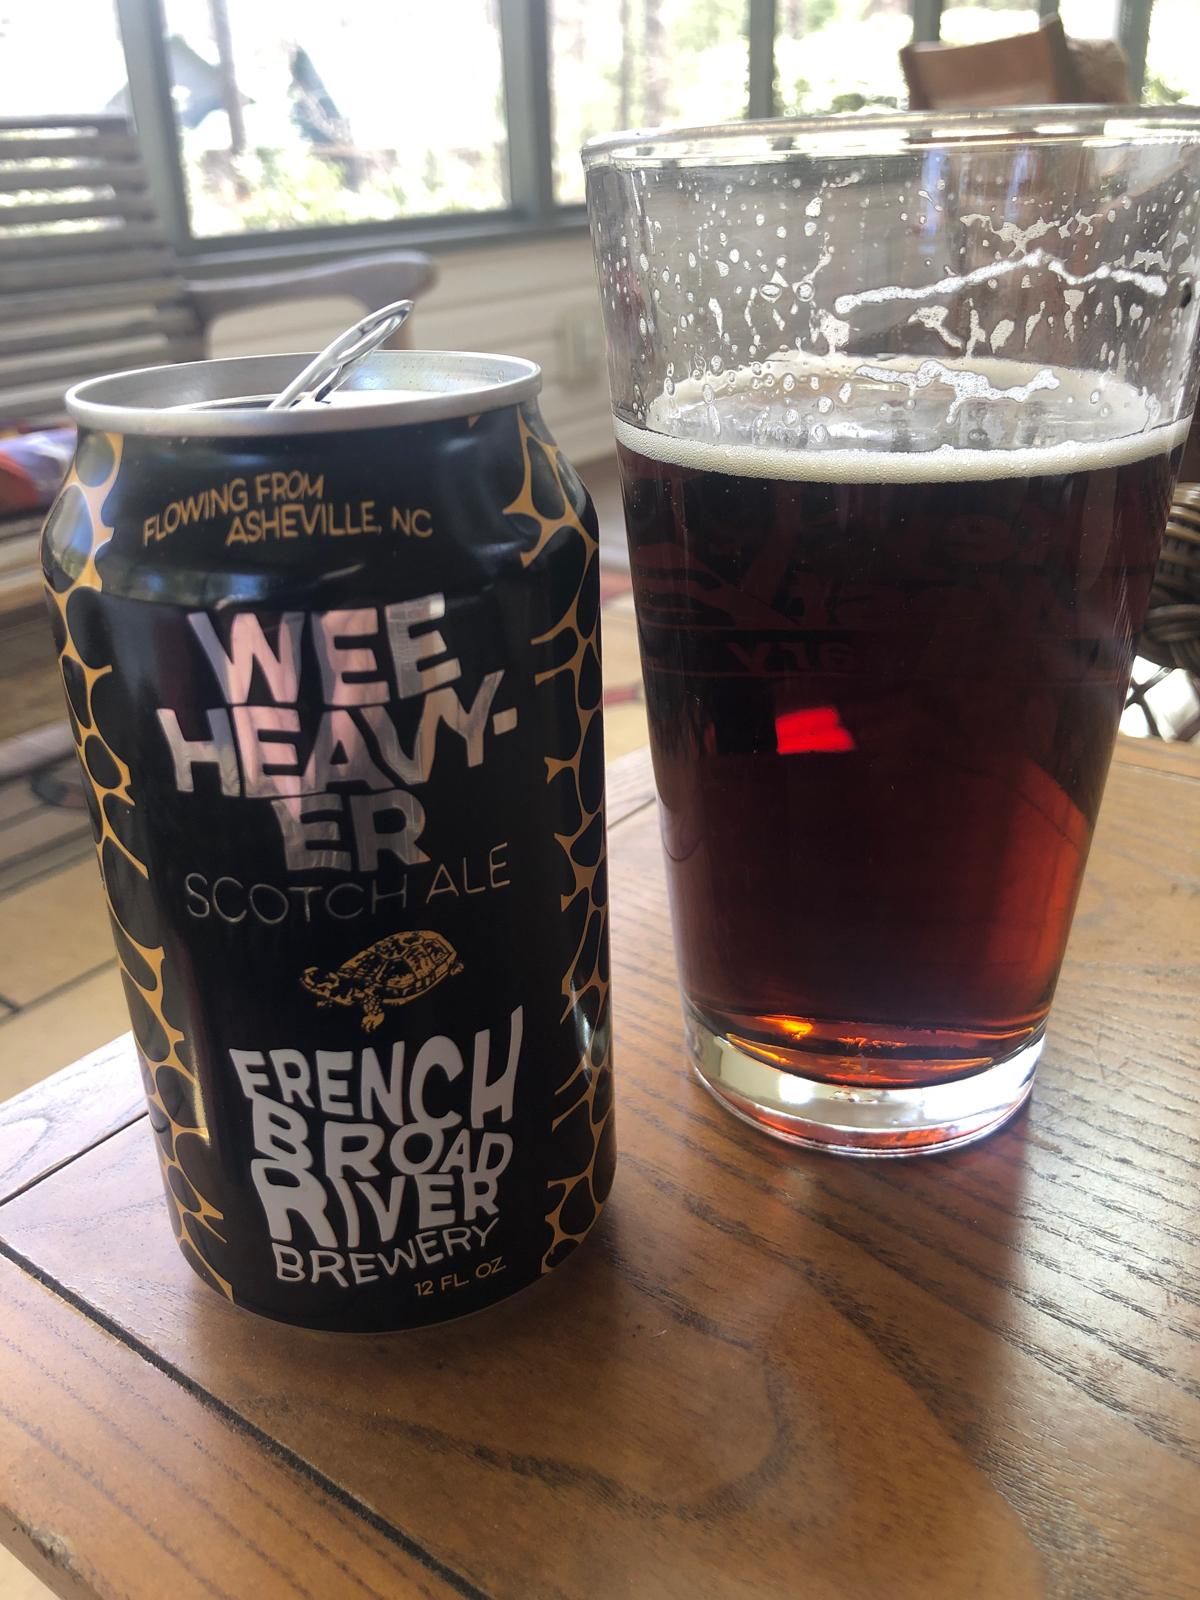 Wee Heavy-er Scotch Style Ale